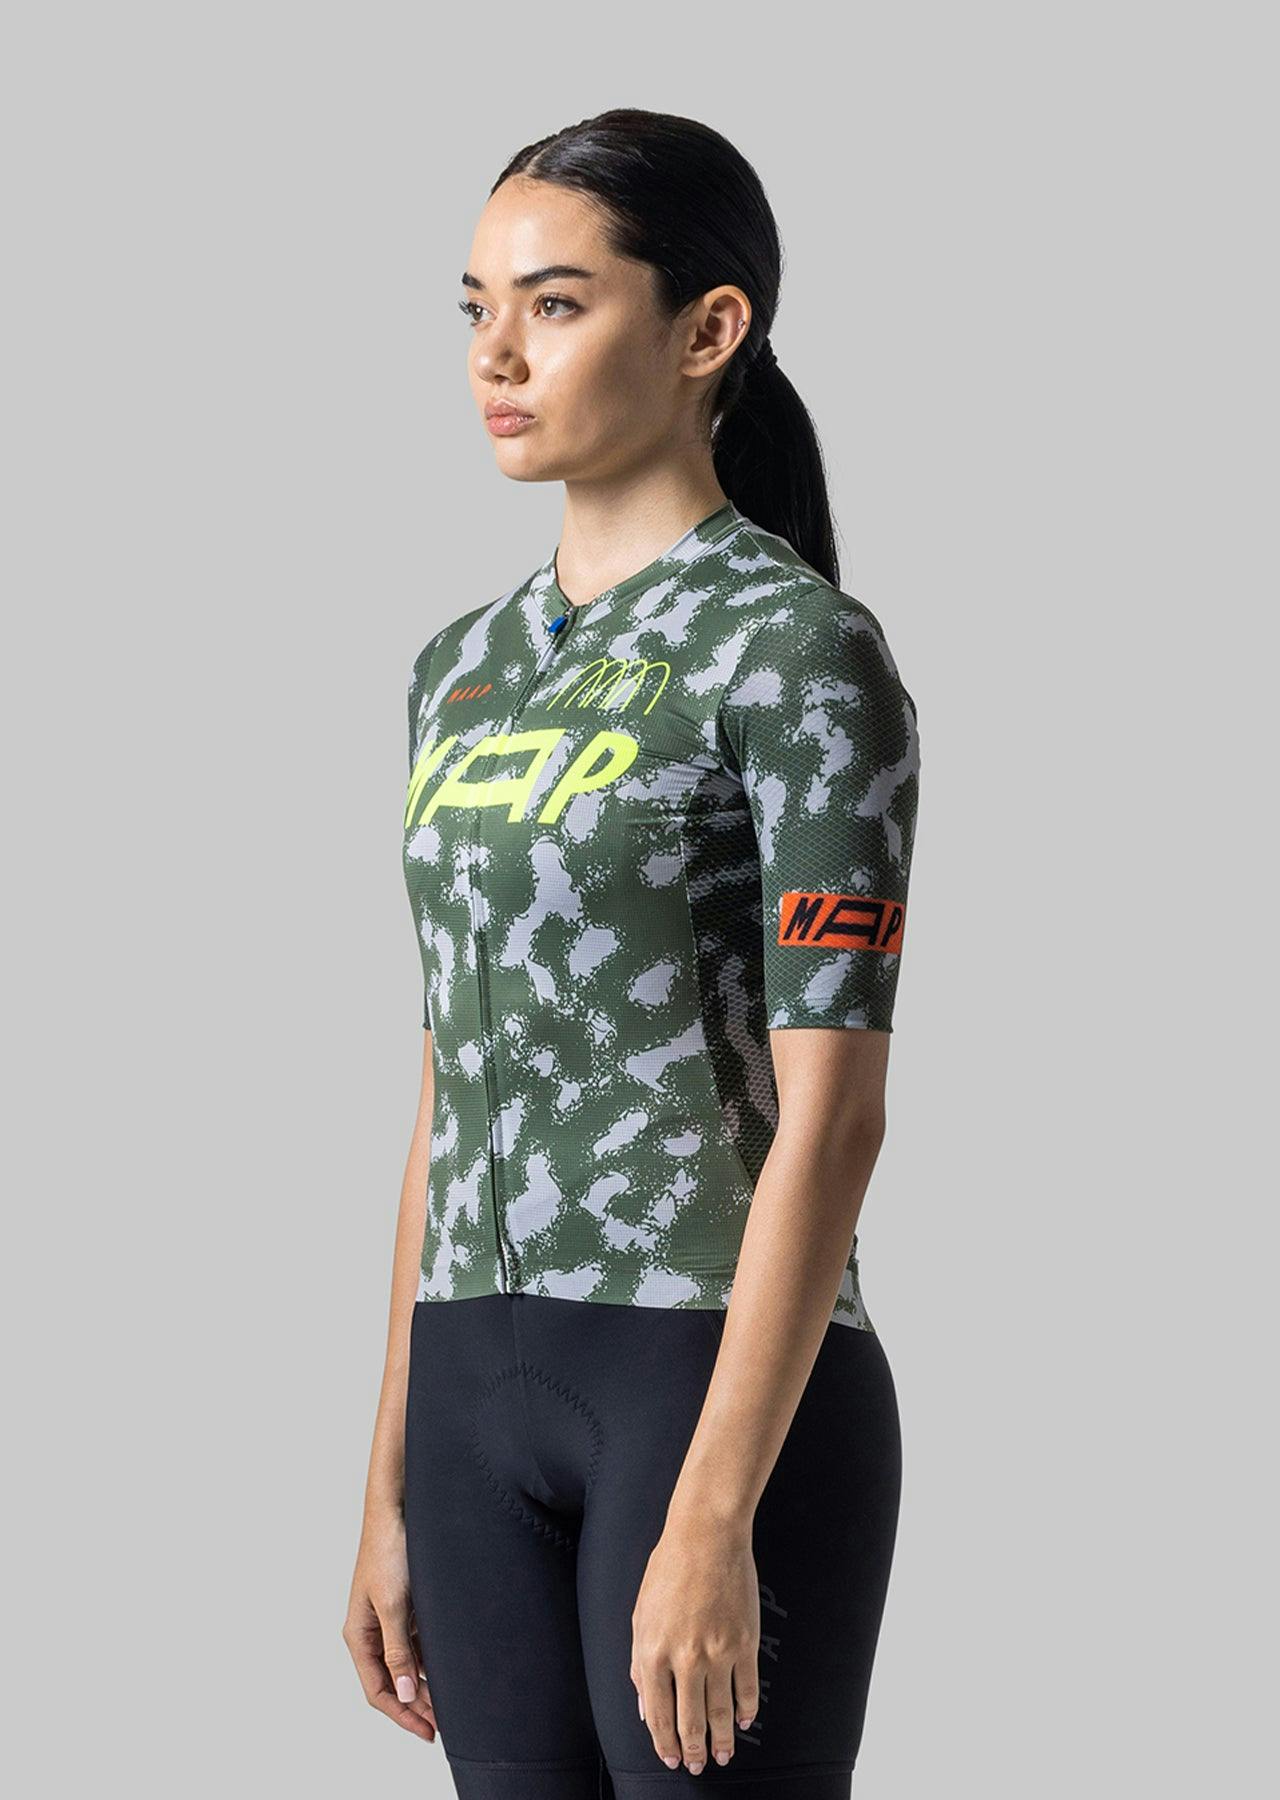 Women's Adapted I.S Pro Air Jersey